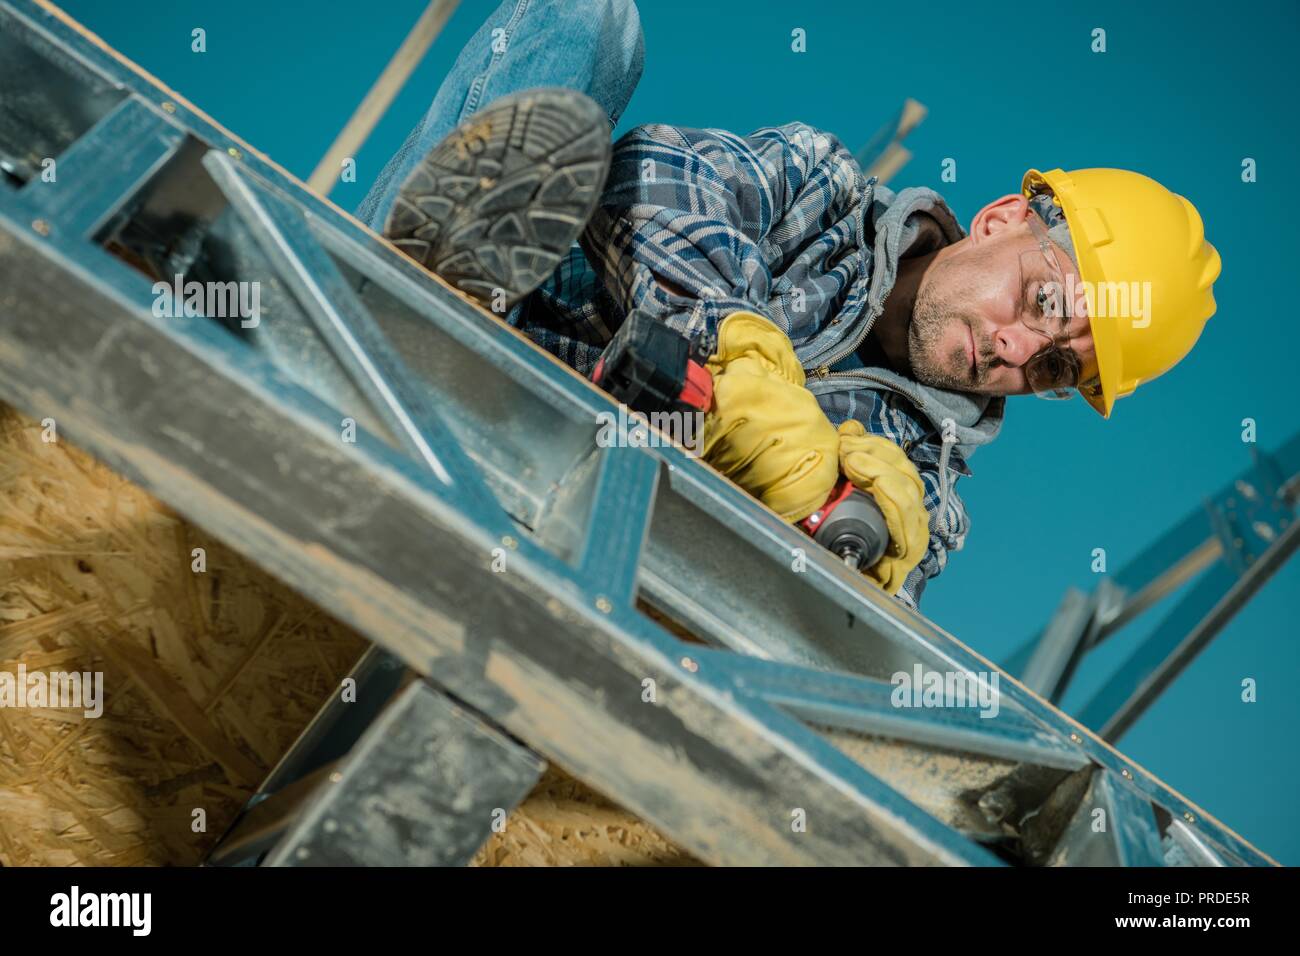 Caucasian Building Worker in His 30s. Construction Site Closeup. Steel Frame Elements. Stock Photo